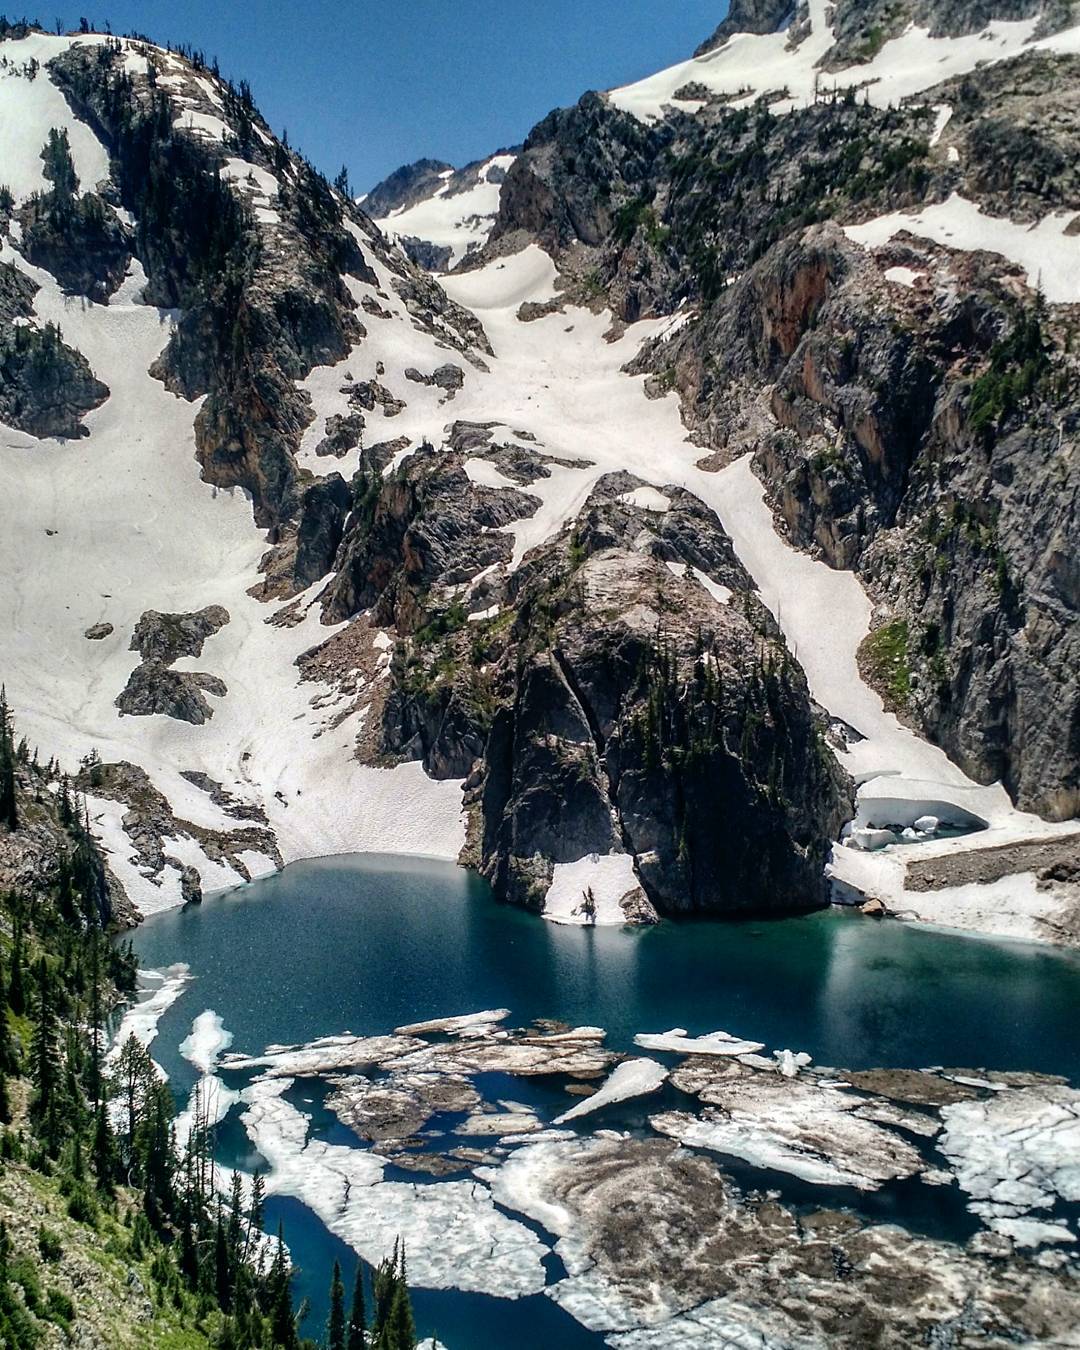 Icy Mountain Ridge and Lake in Sawtooth National Forest. Photo by Instagram user @landscape_lurker